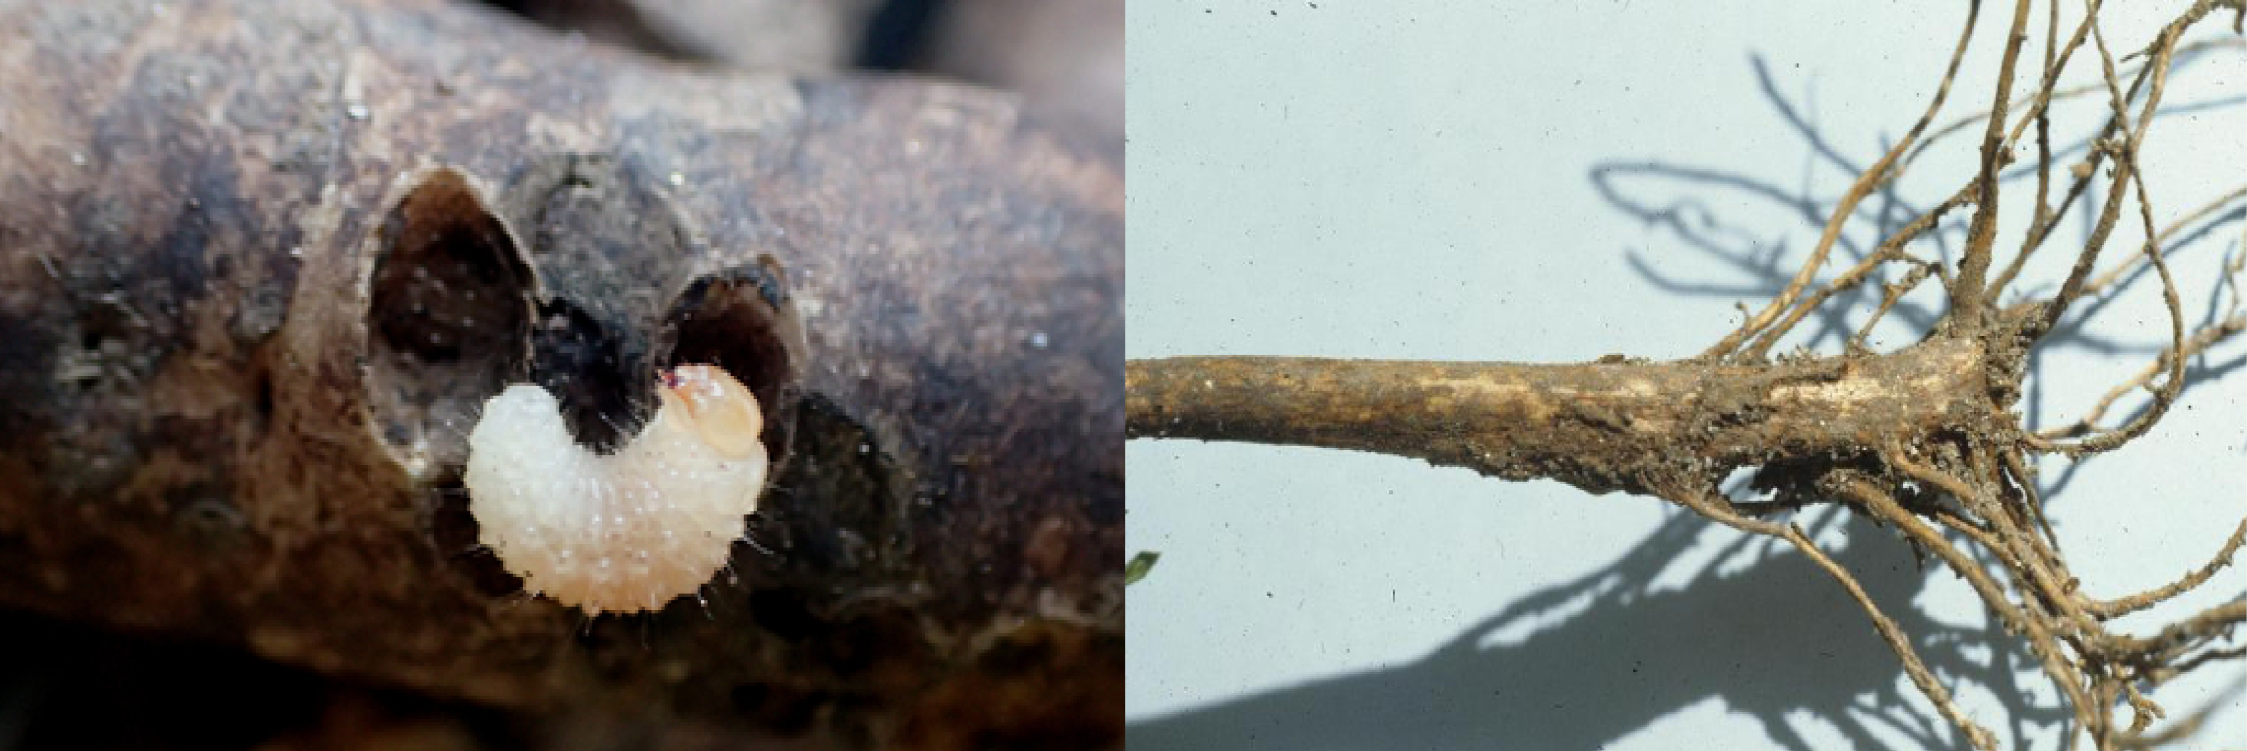 Root weevil larva (left) and larval root damage (right). Image courtesy of Whitney Cranshaw, Colorado State University (left) and Jim Baker, North Carolina State University (right), Bugwood.org.